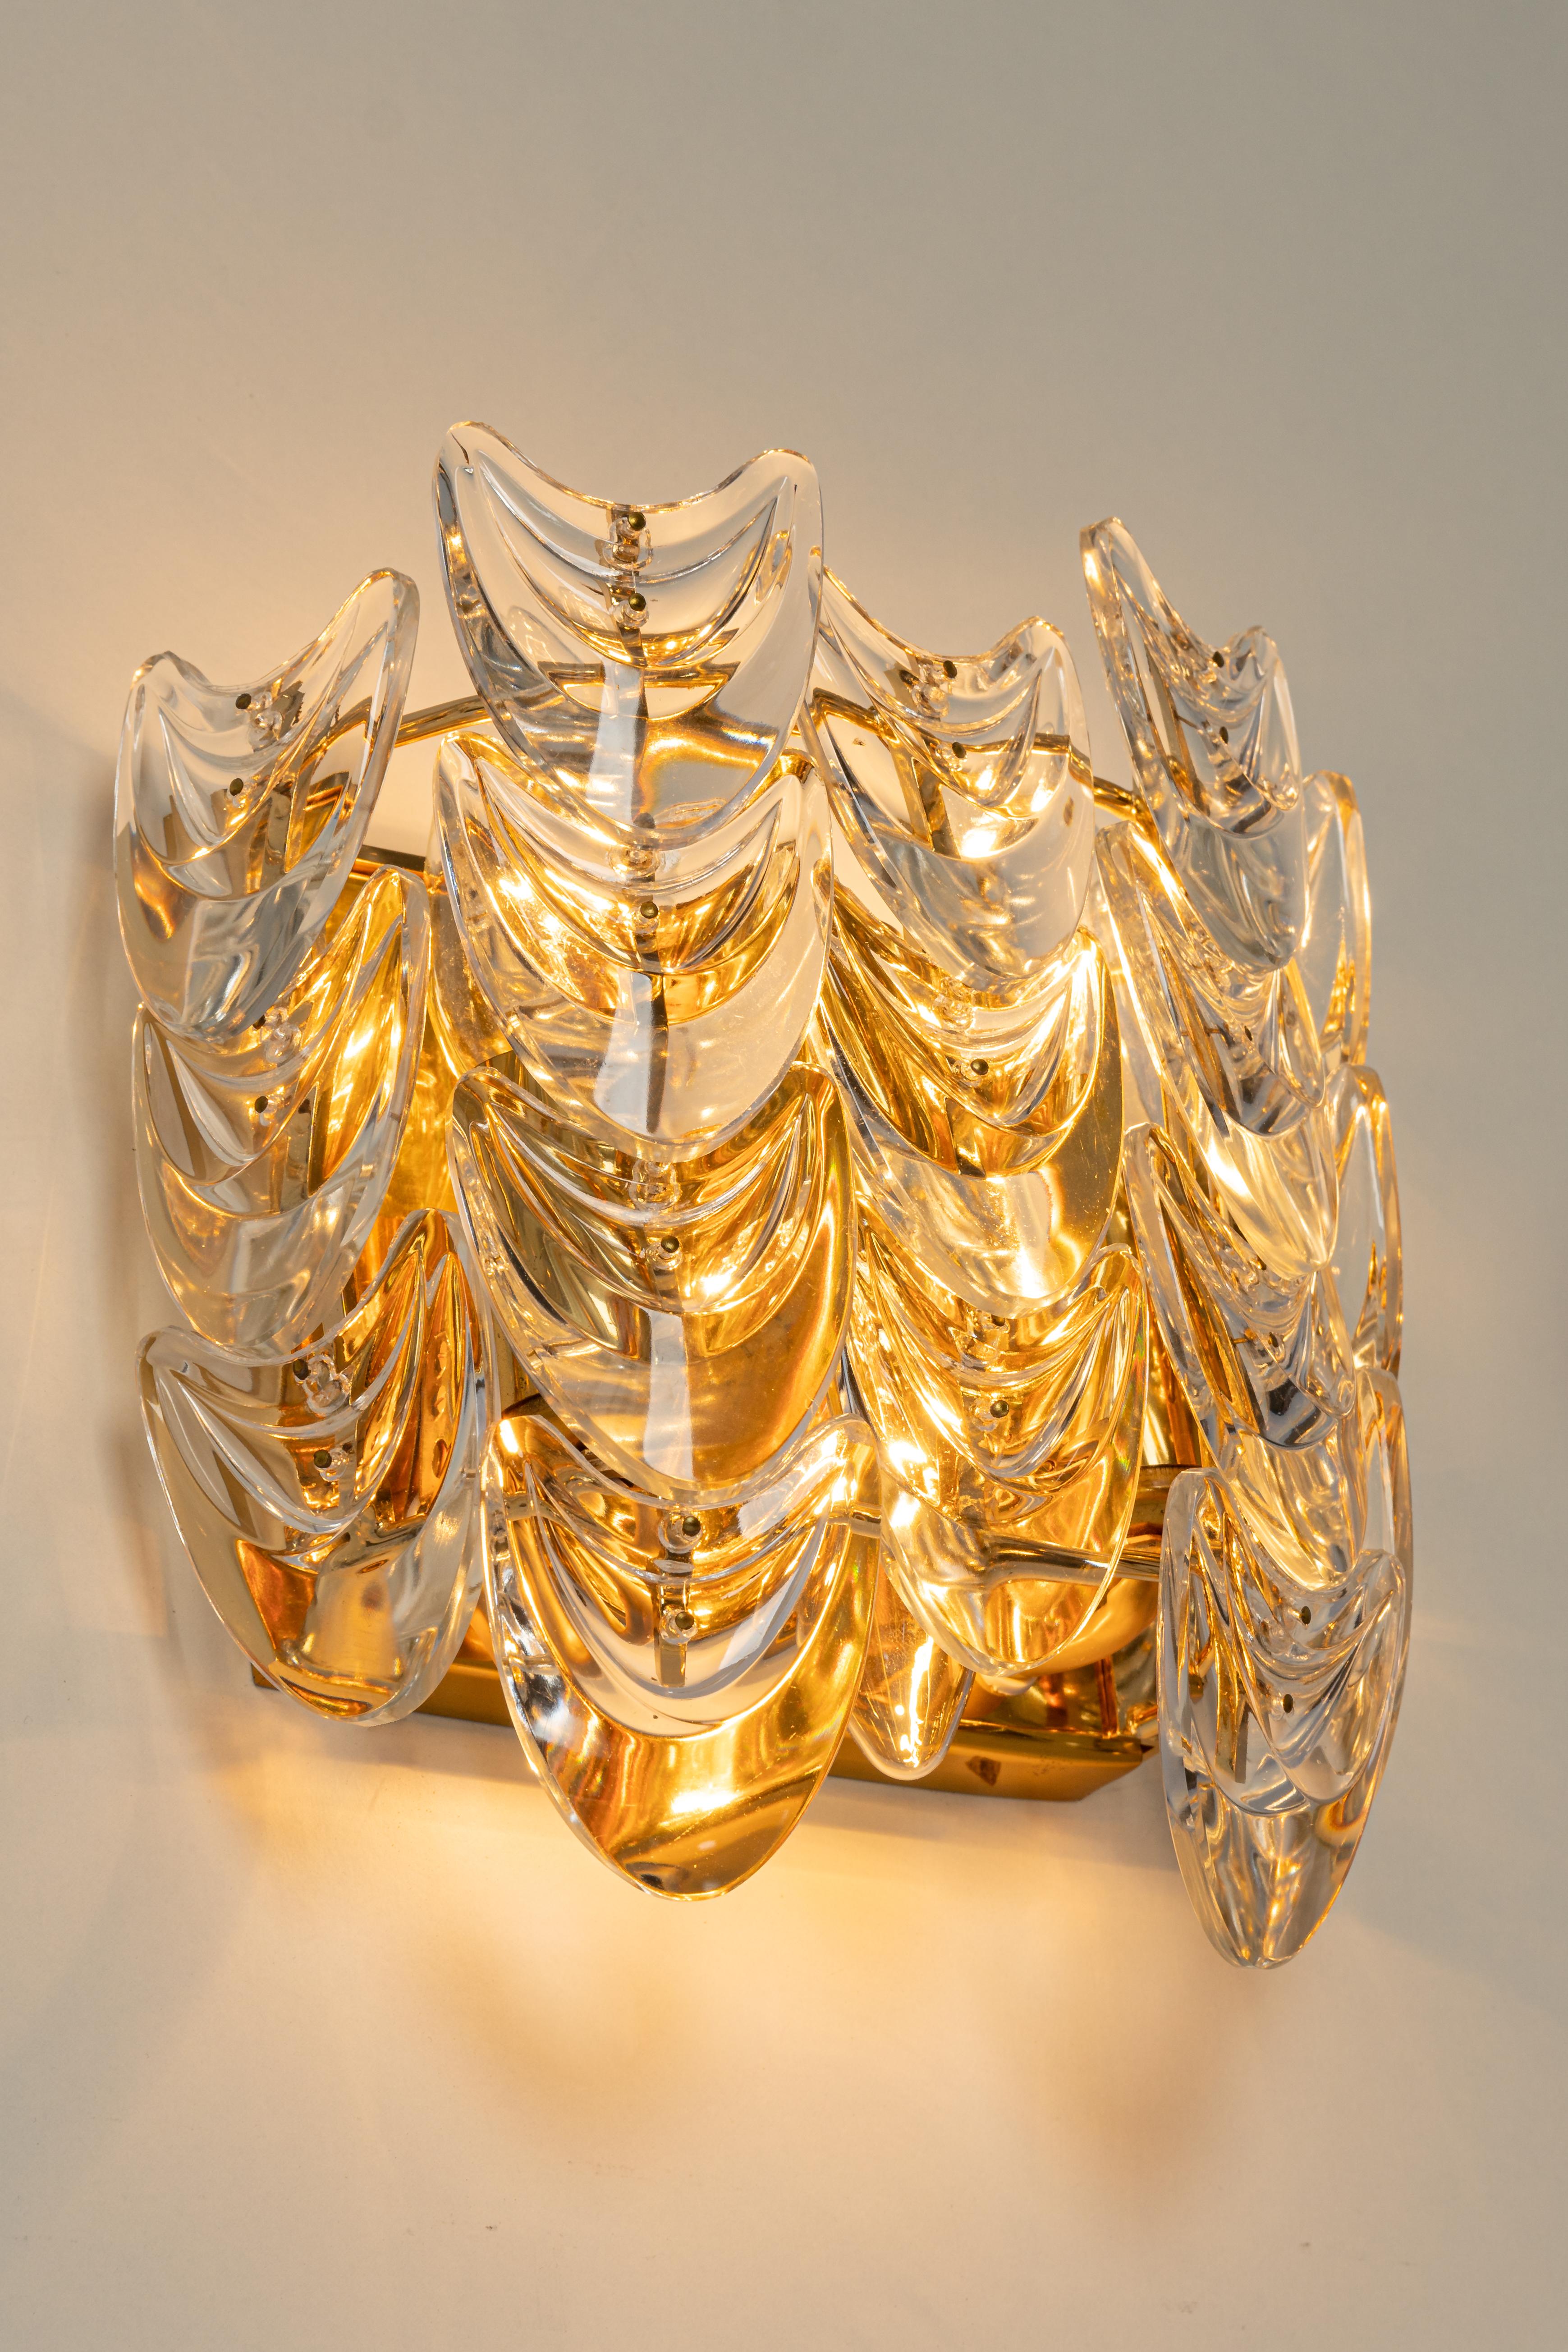 Pair of Gilded Brass Crystal Wall Lights, Sciolari Design, Palwa, Germany, 1960s For Sale 4